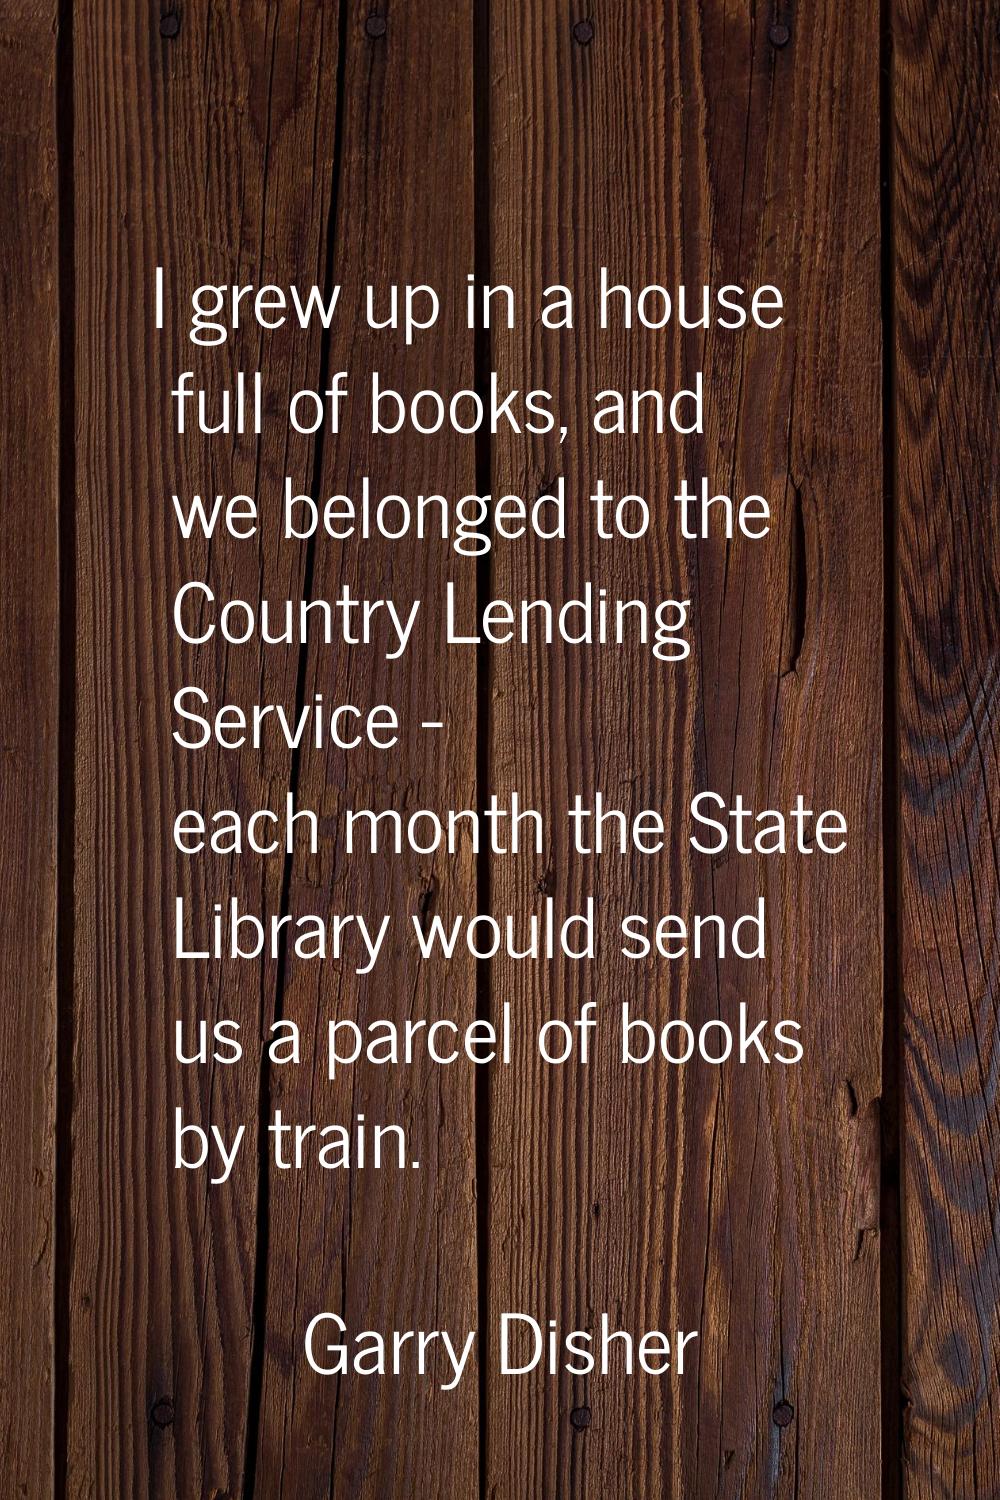 I grew up in a house full of books, and we belonged to the Country Lending Service - each month the